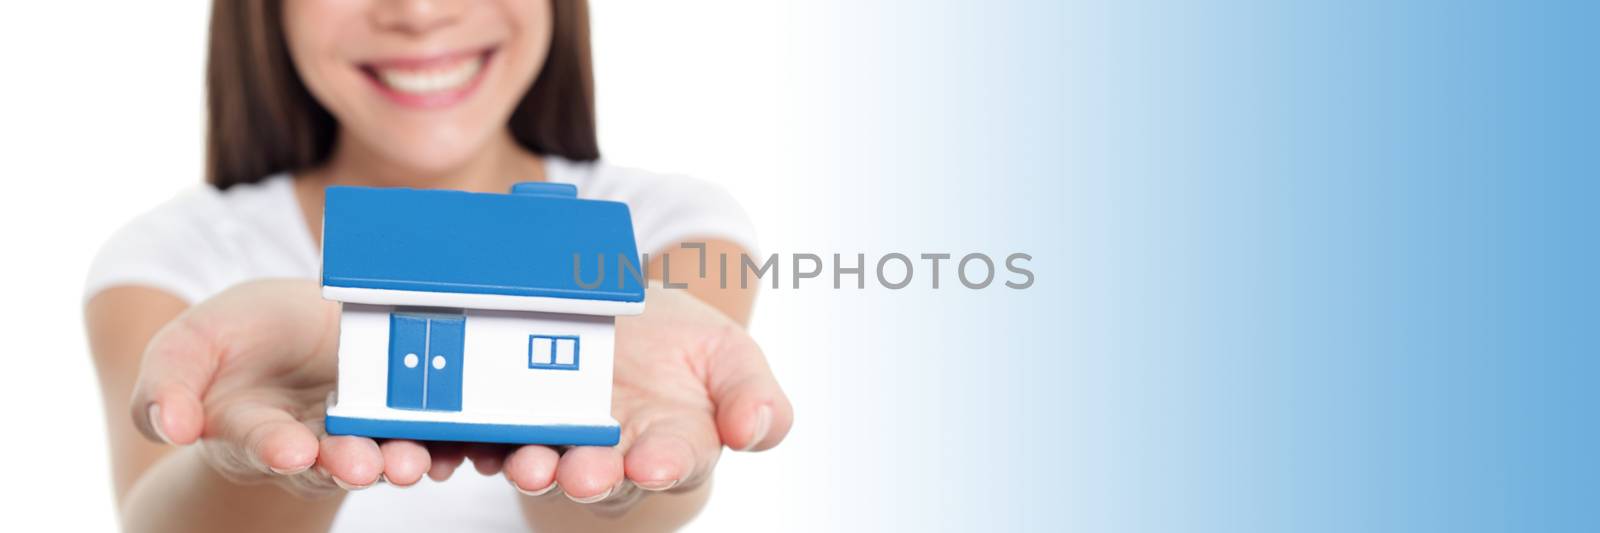 Real estate house banner with blue copy space panorama. Woman smiling showing miniature toy home holding hands for home insurance protection concept.